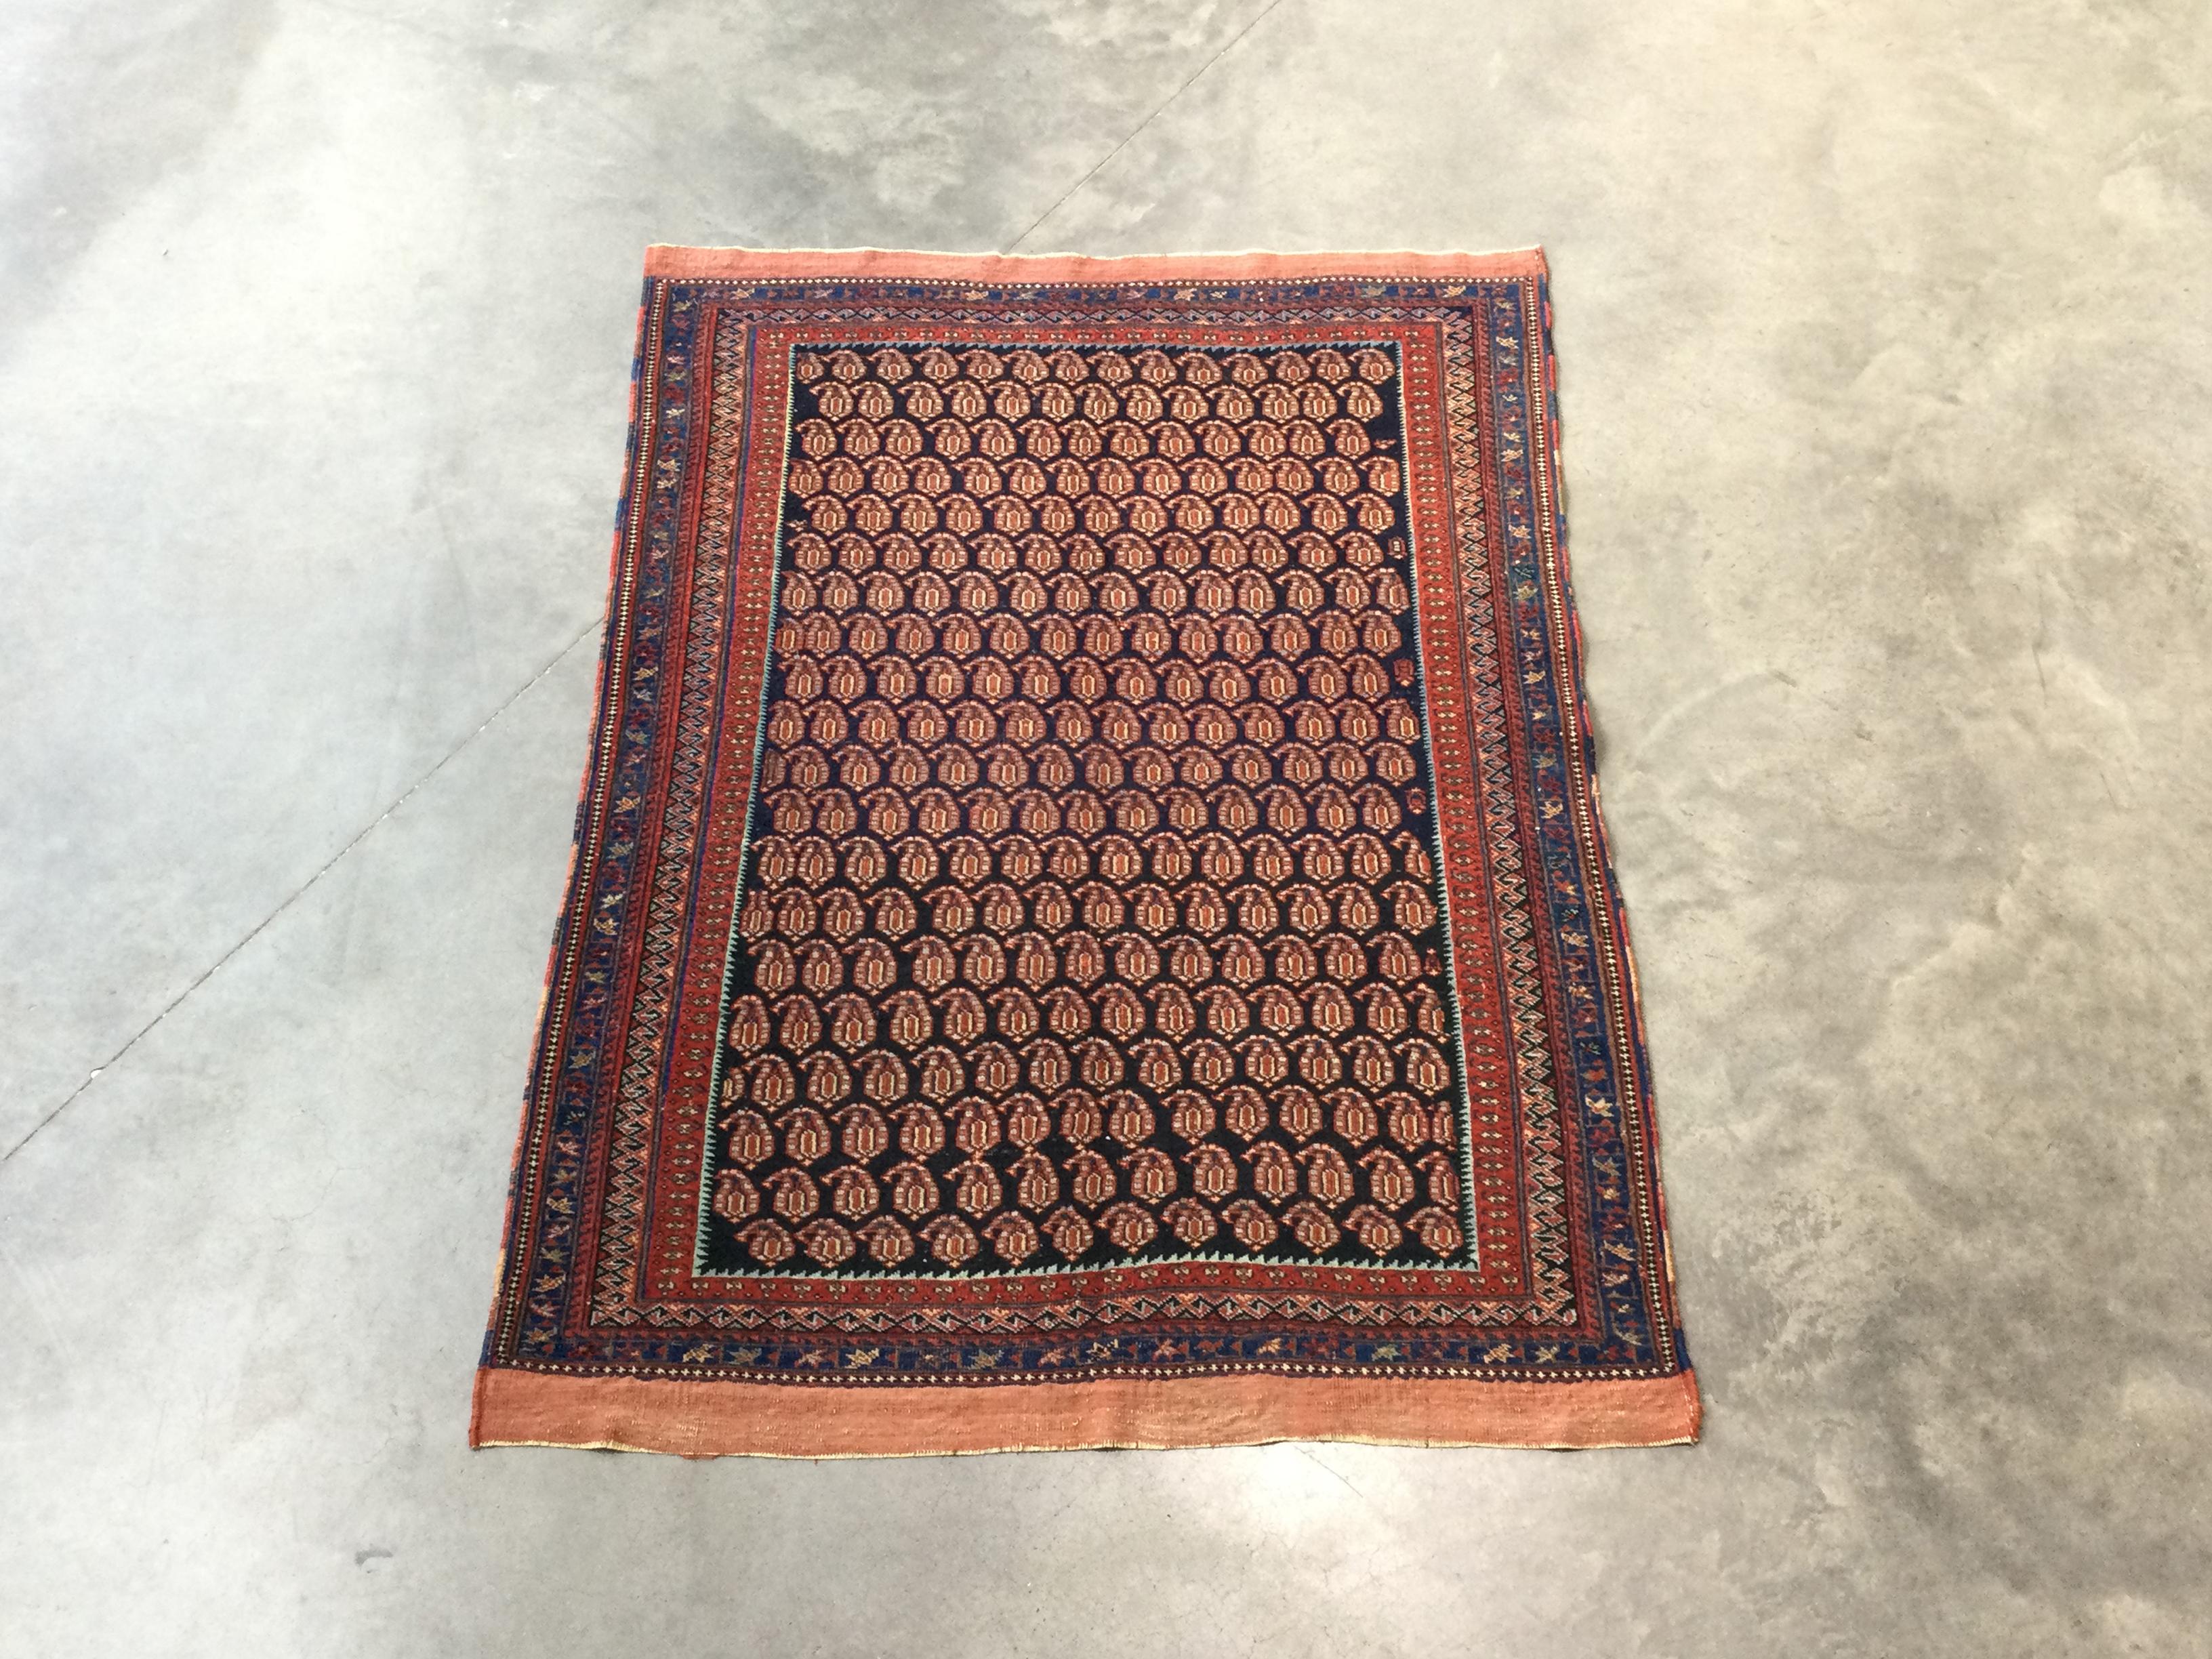 Small size Senneh rug. Bothe Design. Measurements 1.65x 1.25 m.
 - Excellent work on an extremely fine knotted piece.
 - Small, interlocking design throughout the central field of great decorative richness.
 - It is a rug that is ideal for an office